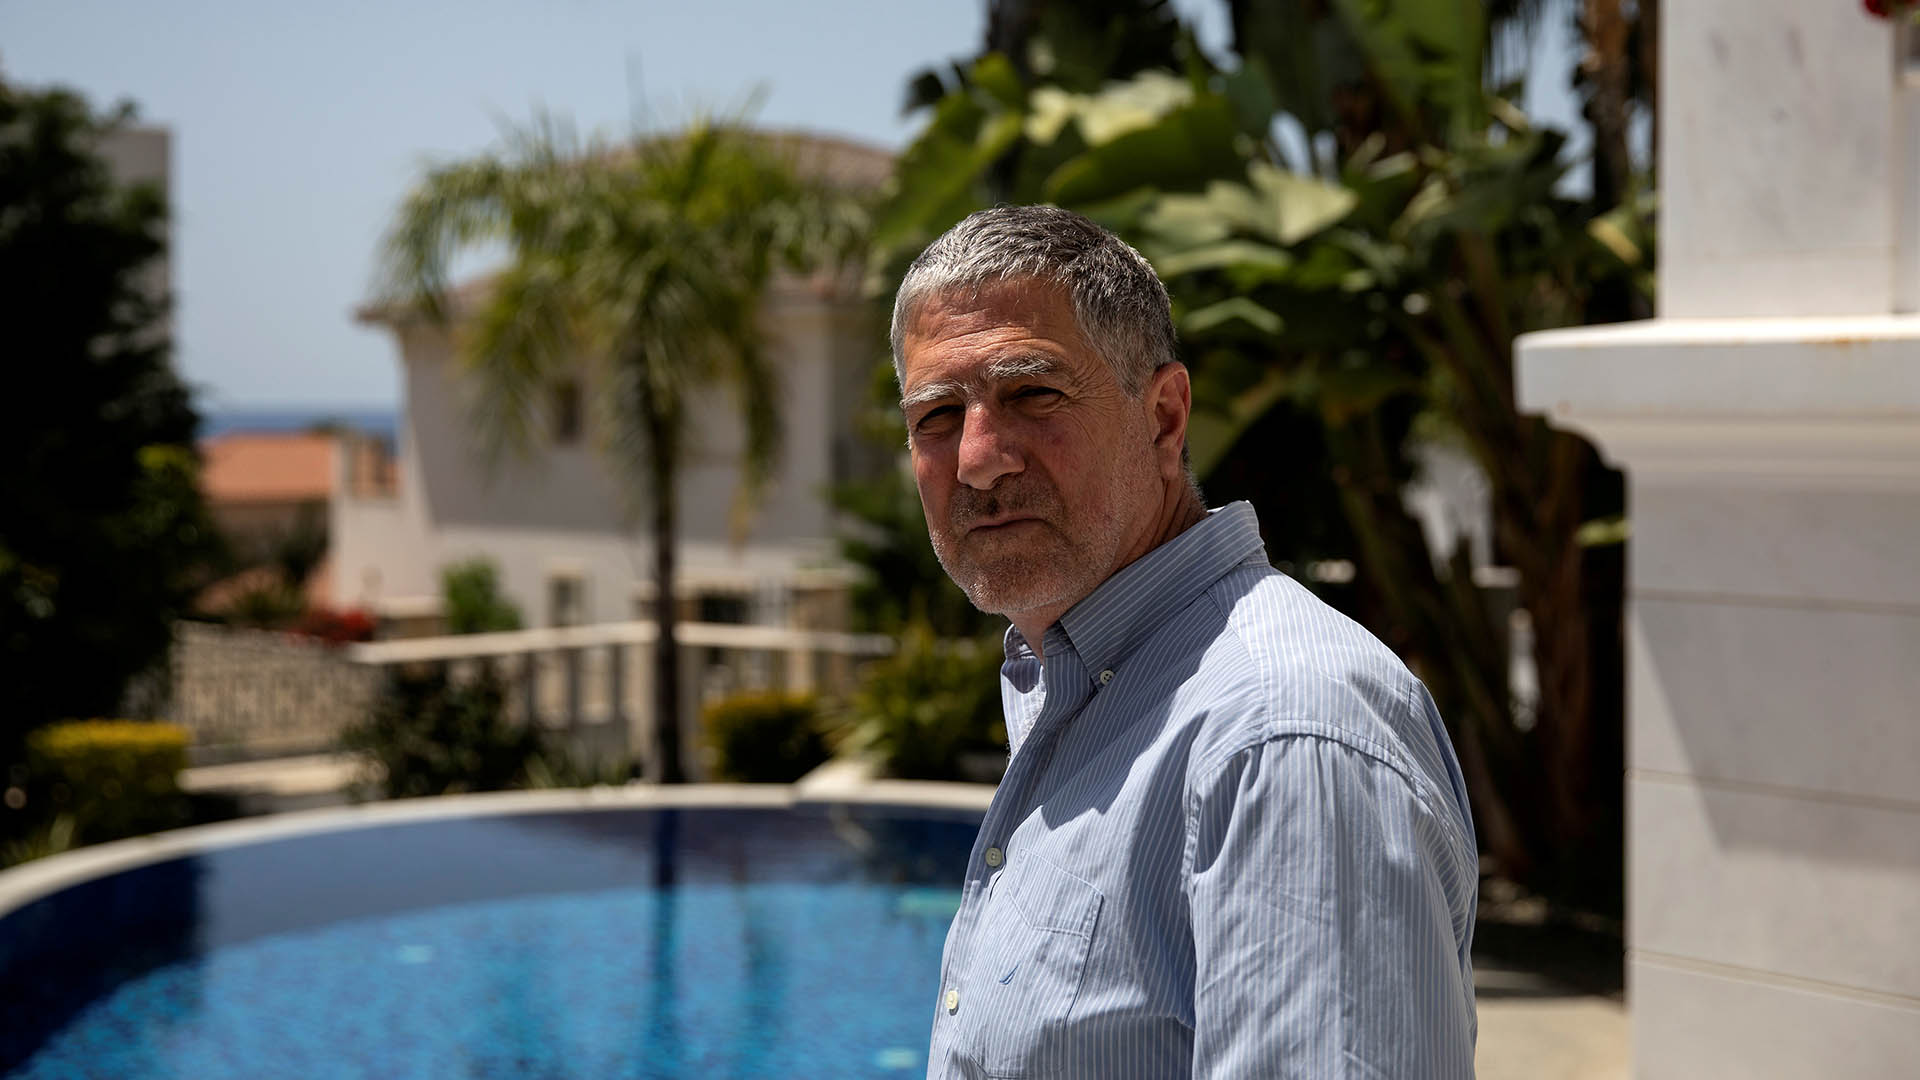 Grey-haired man in blue shirt standing in front of a swimming pool